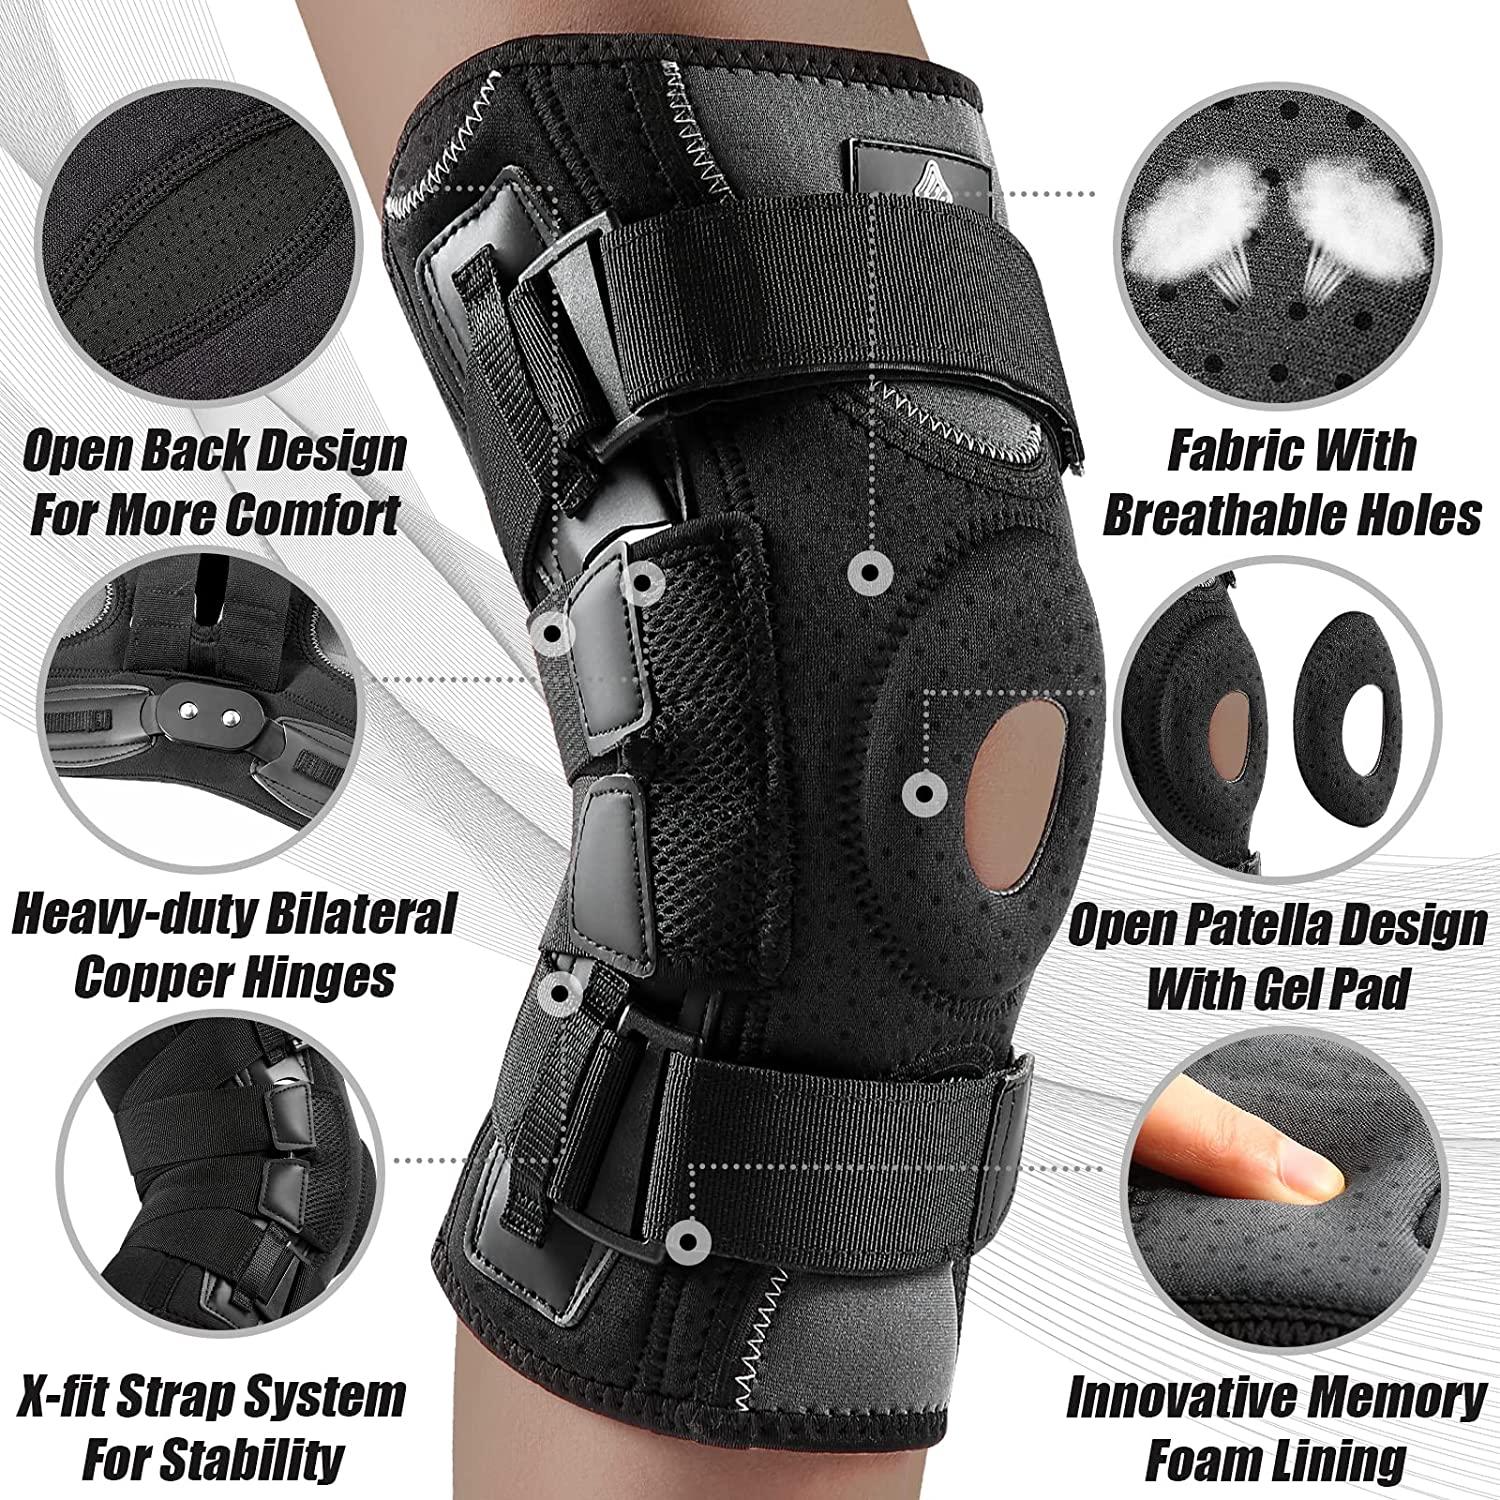 Buy Hinged Knee Brace Support Side Patella Stabilizers online